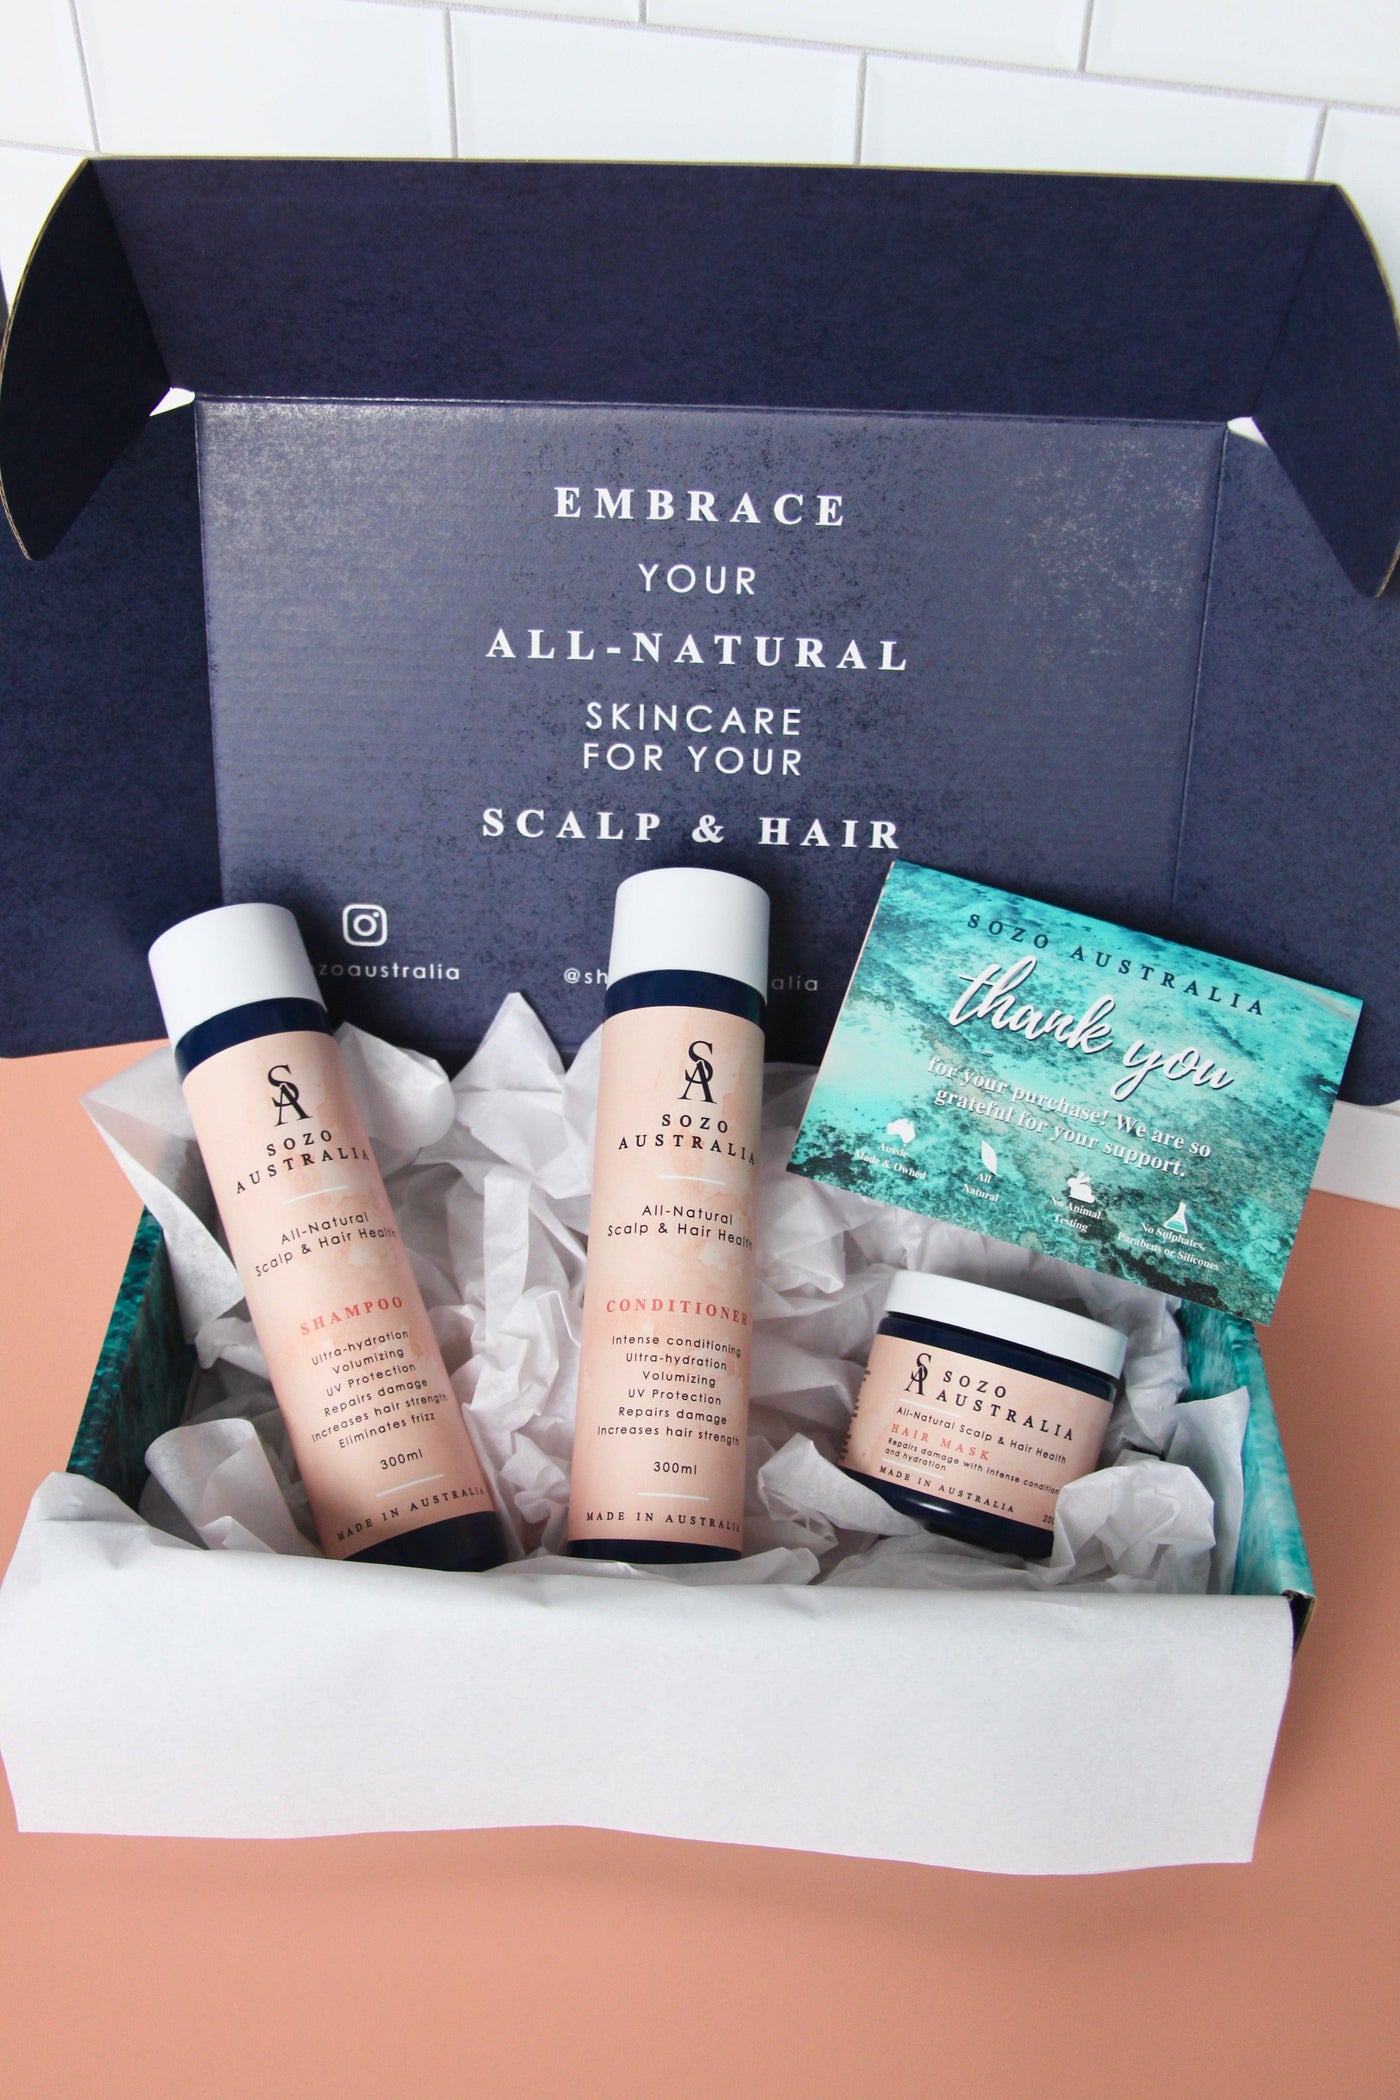 Sozo Australia Hair Health Trio which consists of a natural shampoo, conditioner and hair mask in a navy box